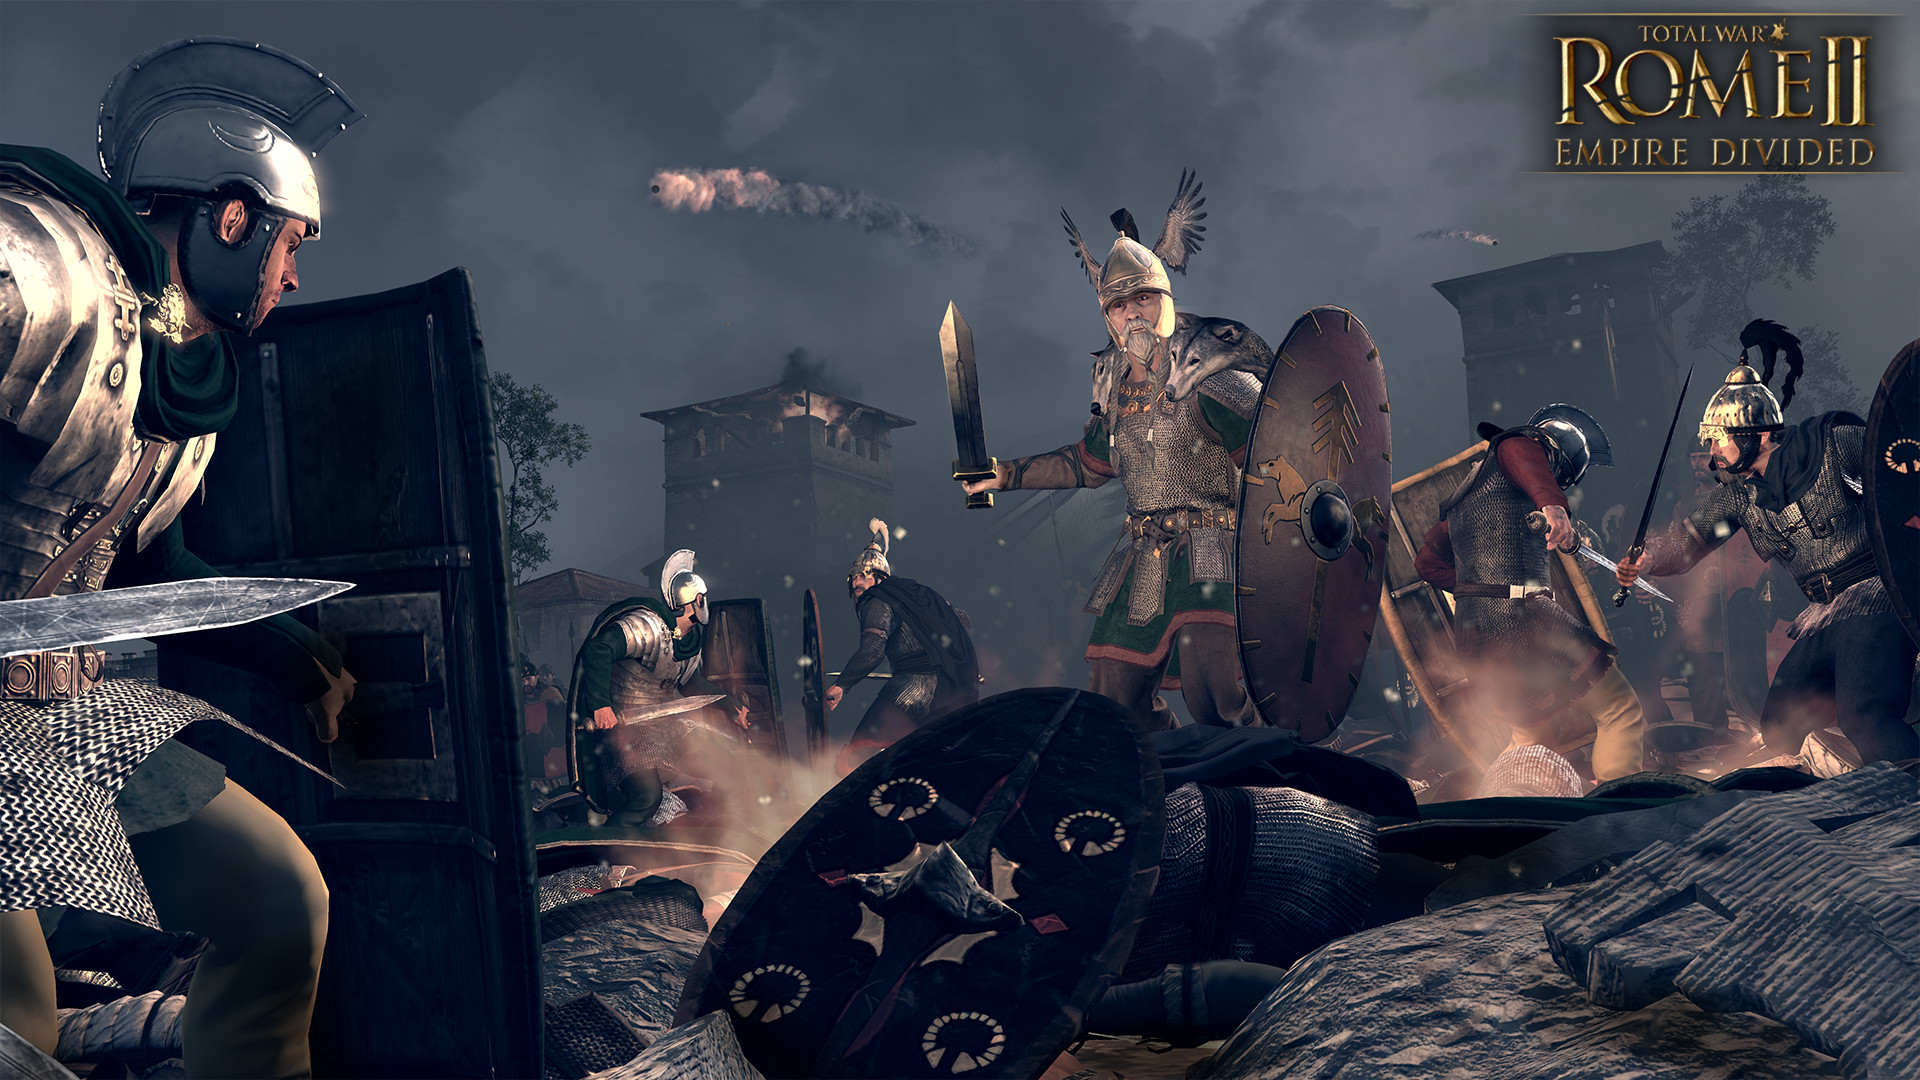 Total War: ROME II - Empire Divided Campaign Pack Featured Screenshot #1